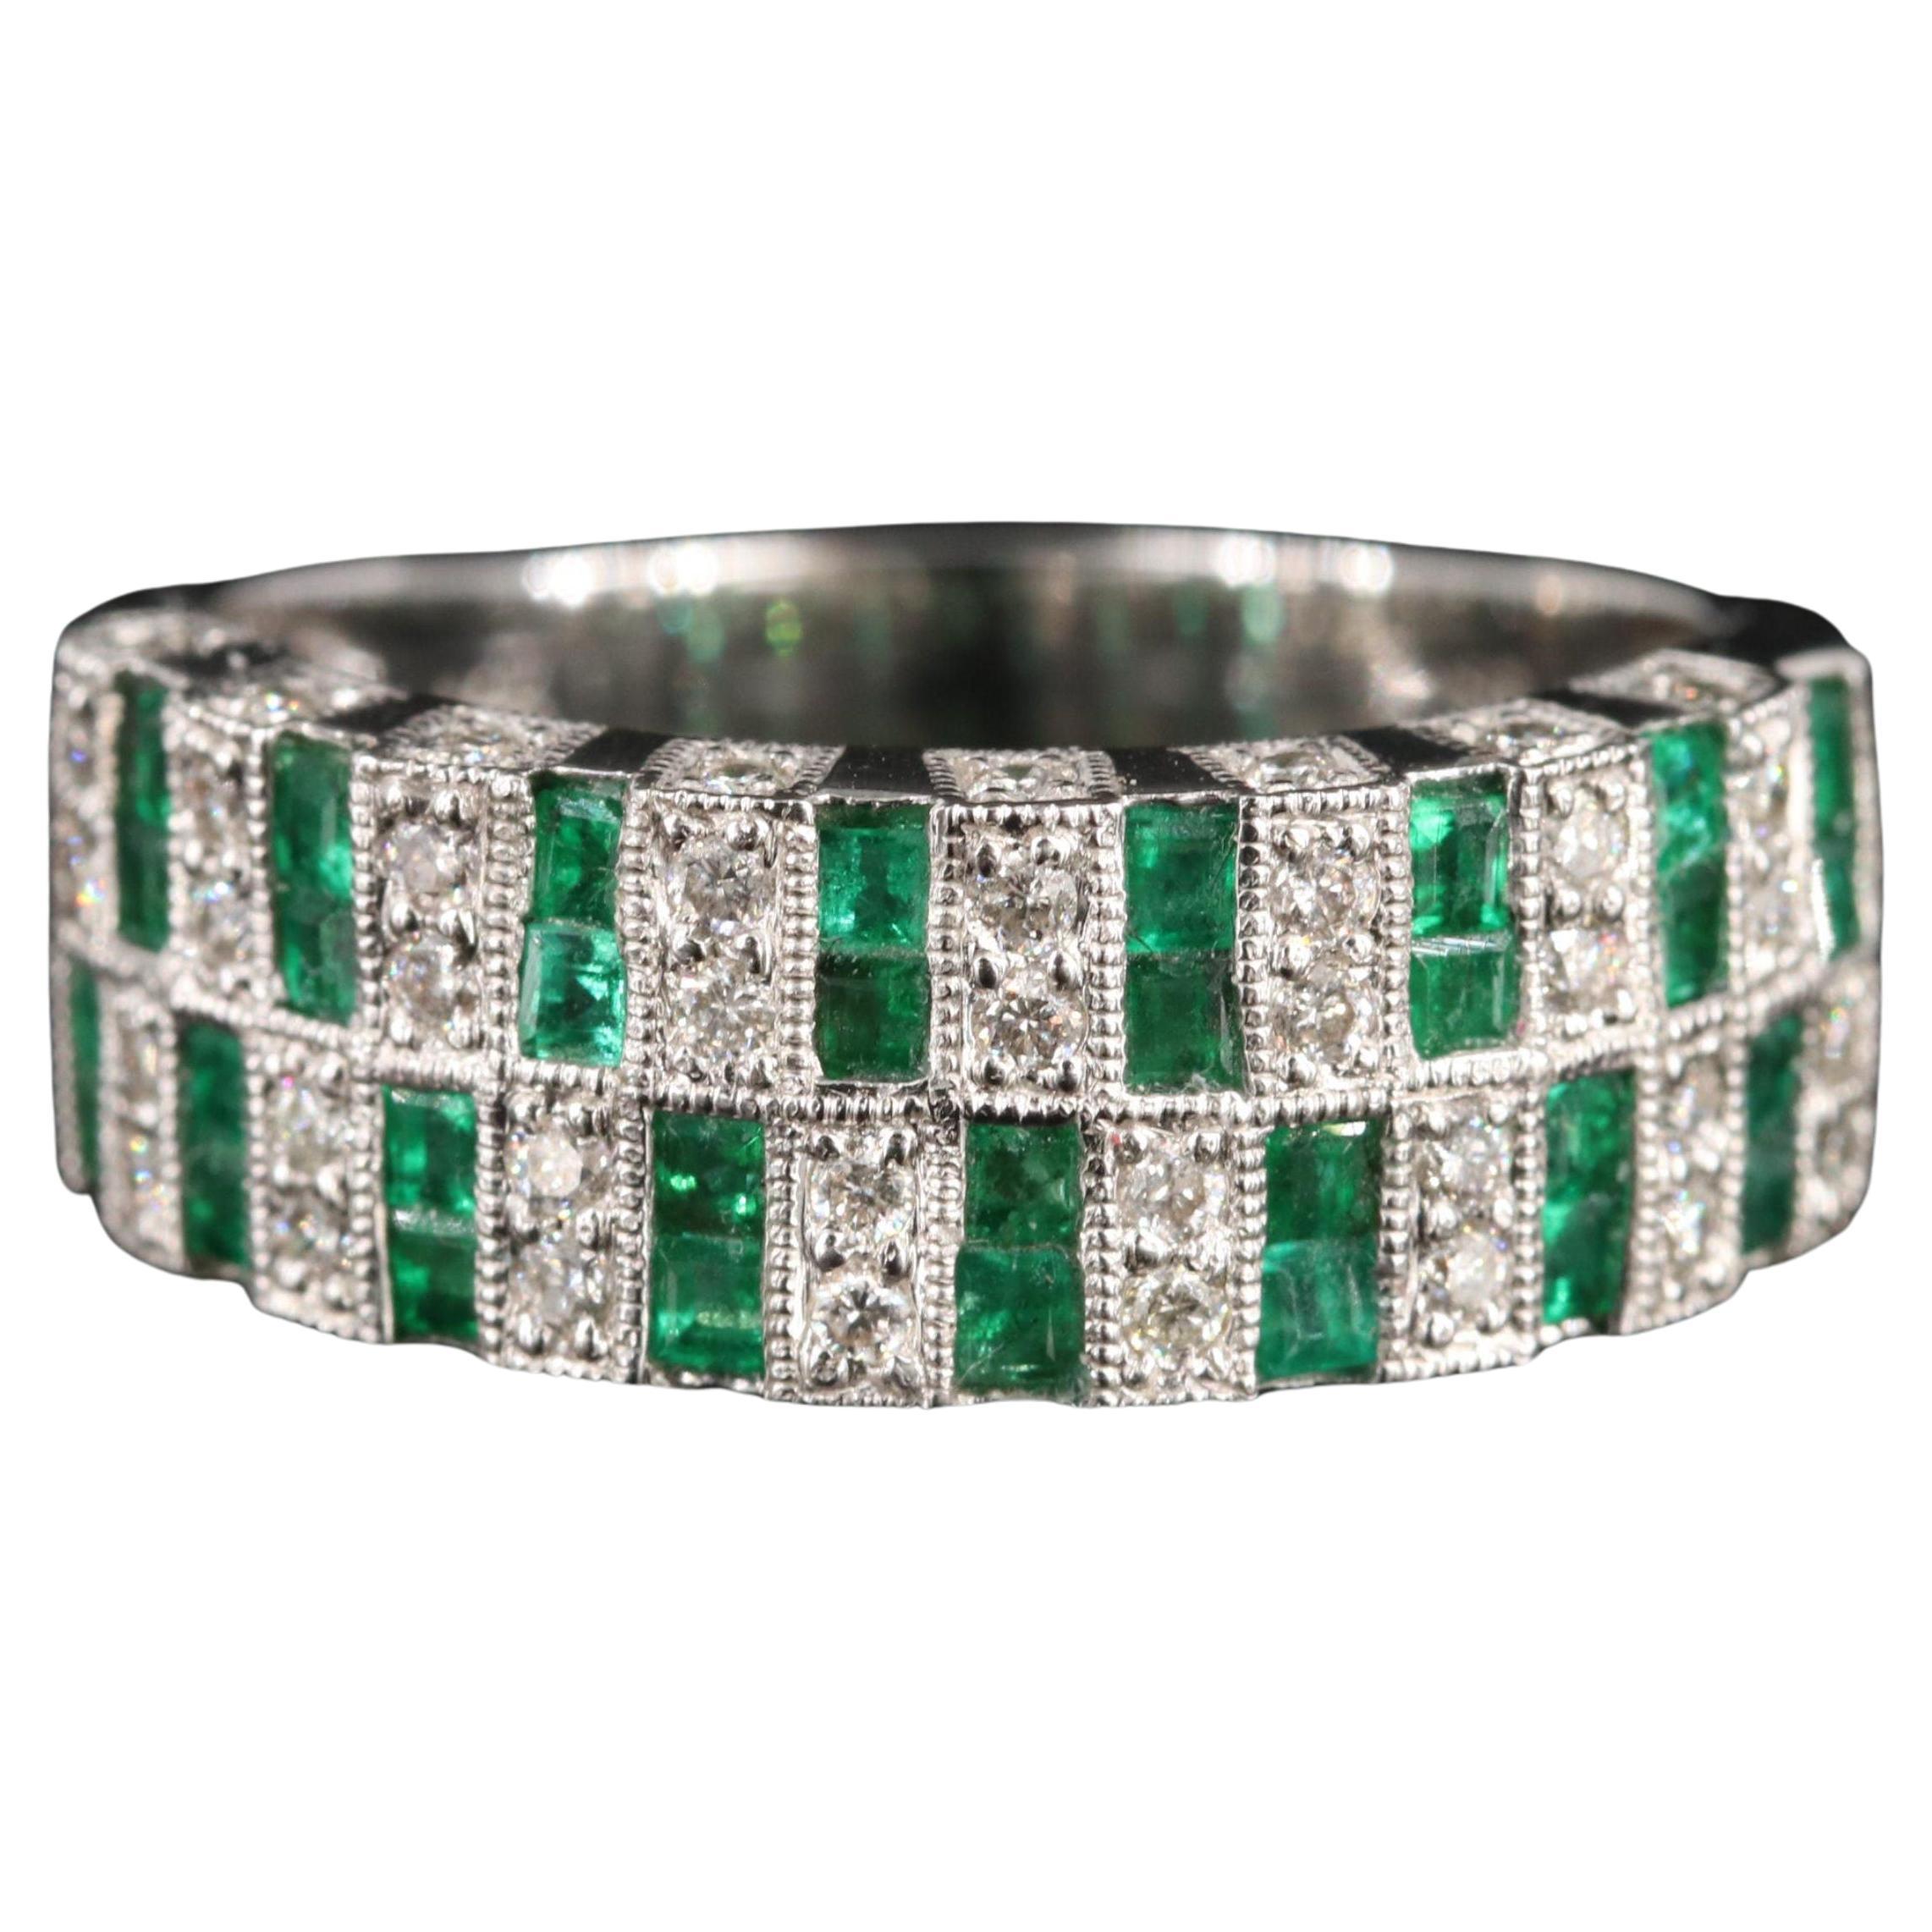 For Sale:  Vintage White Gold Natural Emerald and Diamond Wedding Band Ring, Cluster Ring